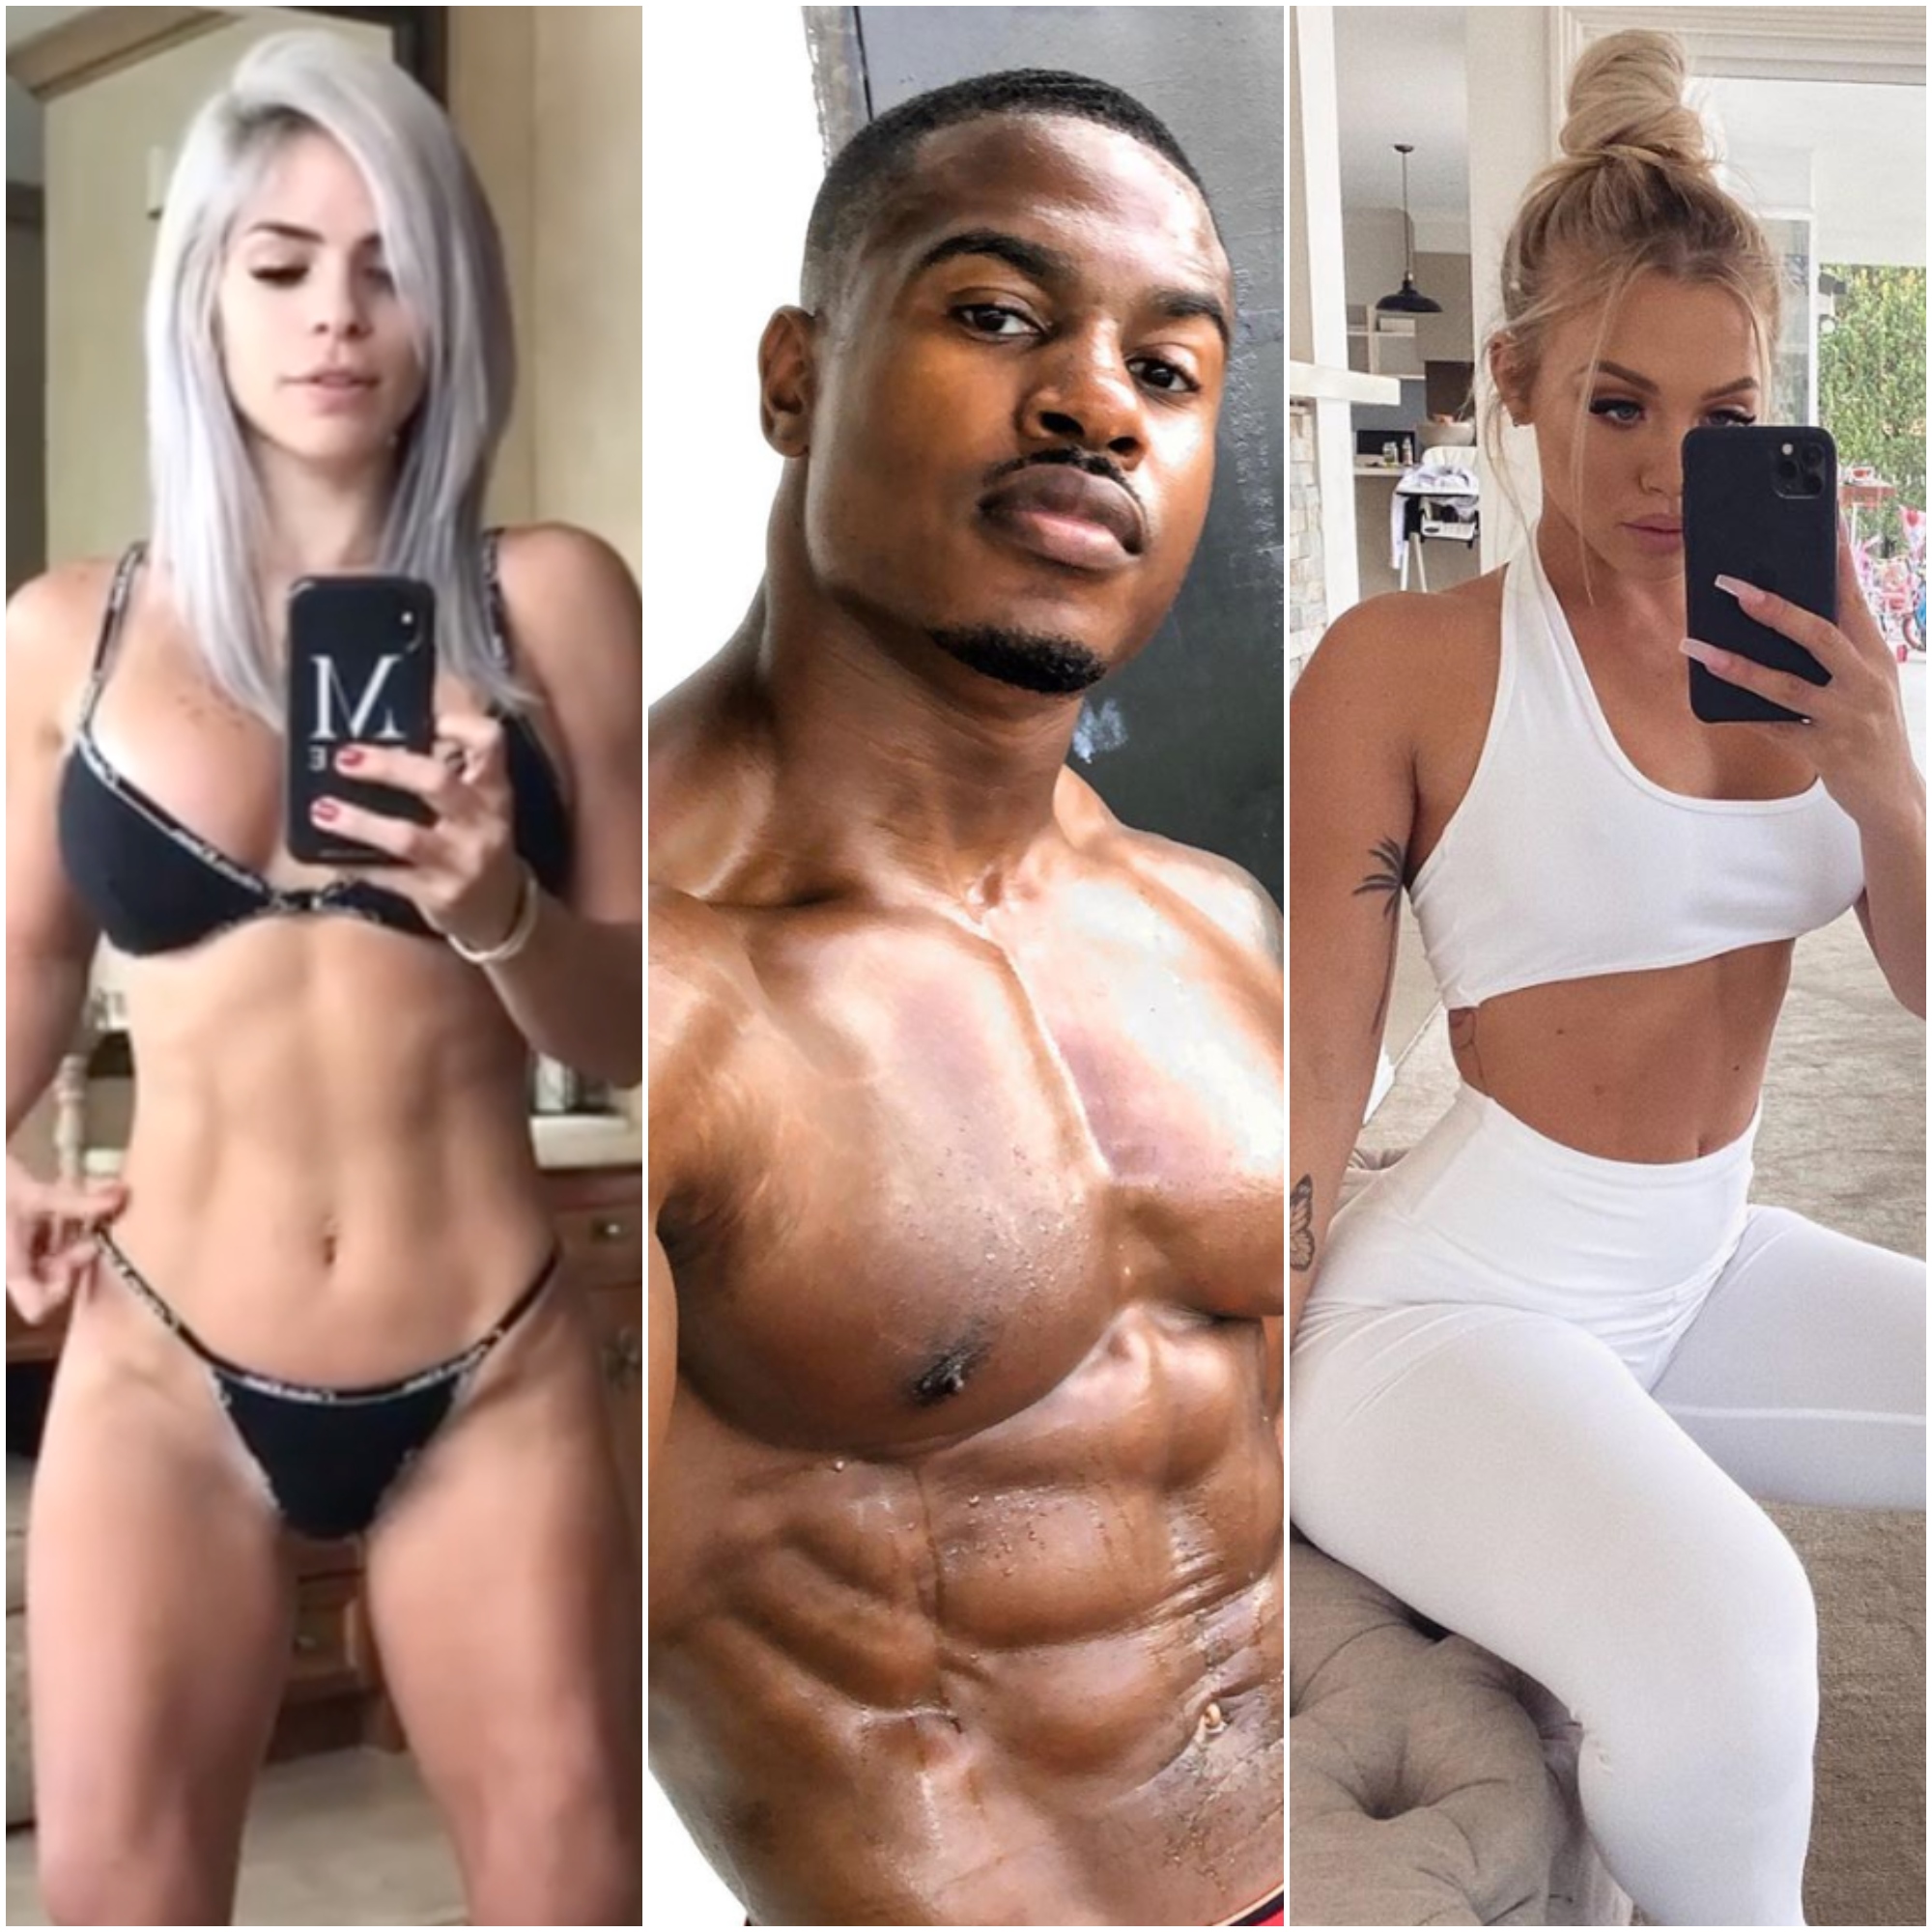 These Health and Fitness Influencers Can Give You Some Expert Tips